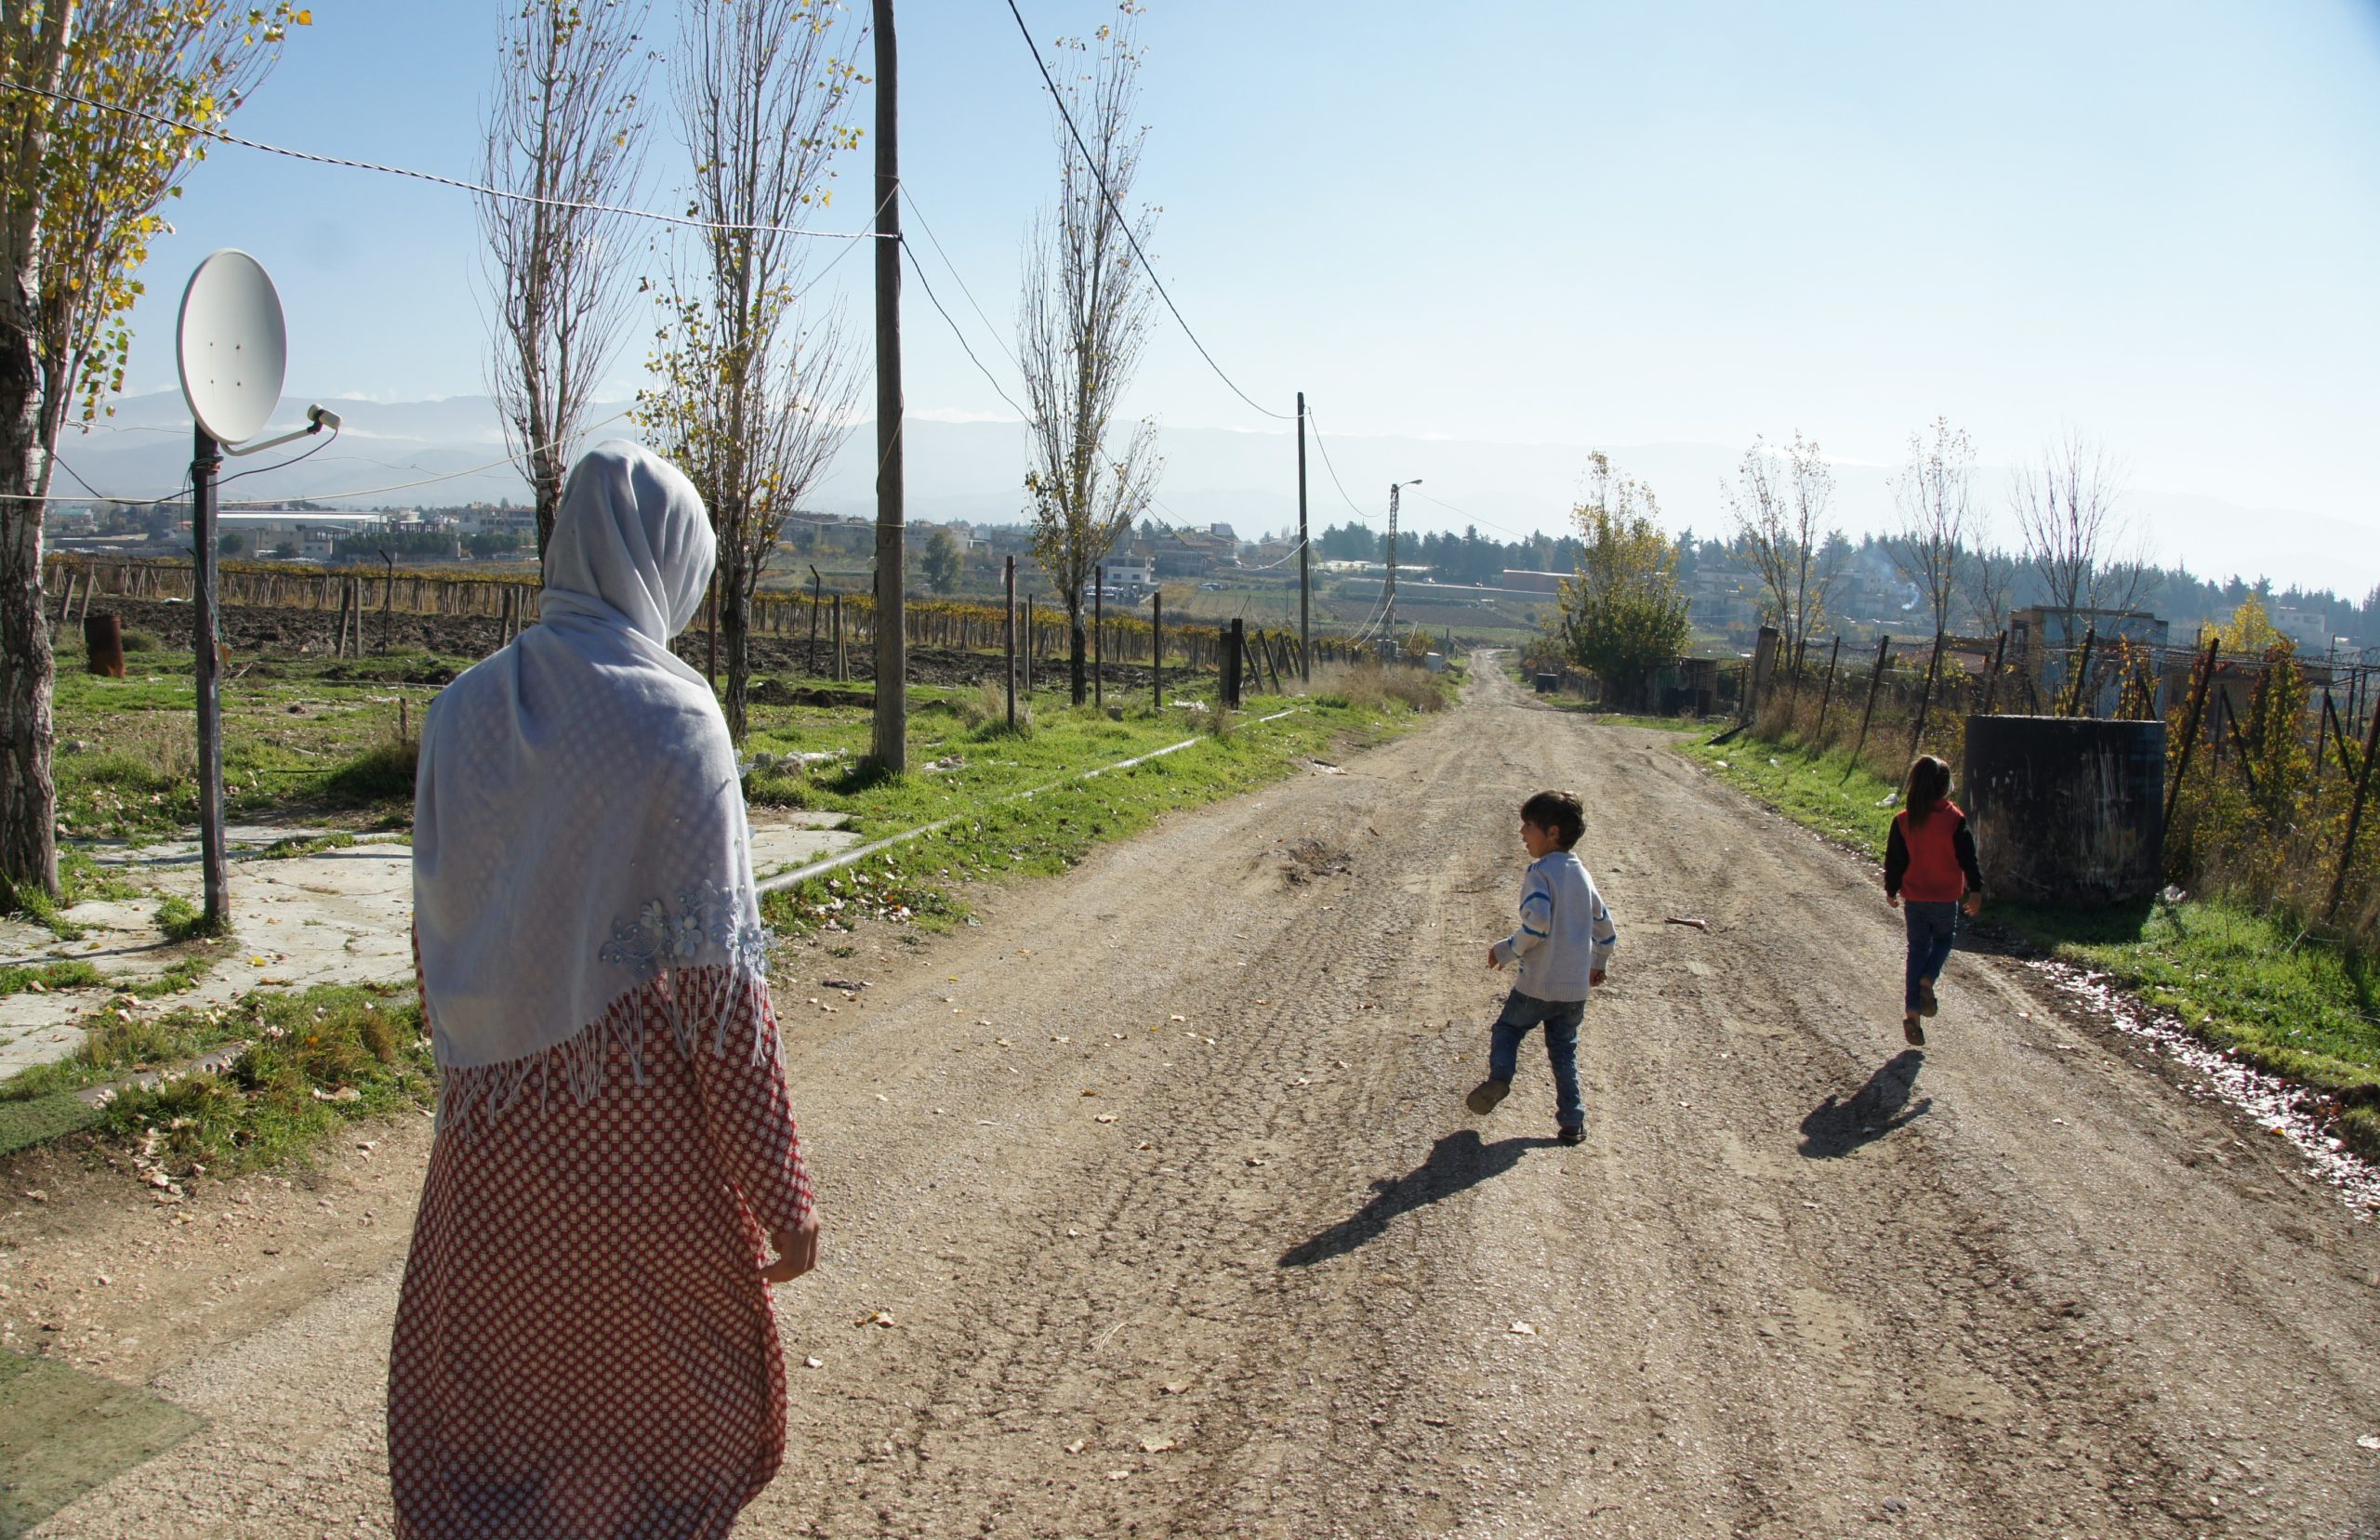 Syrian mother walks on a road as her two sons run ahead.